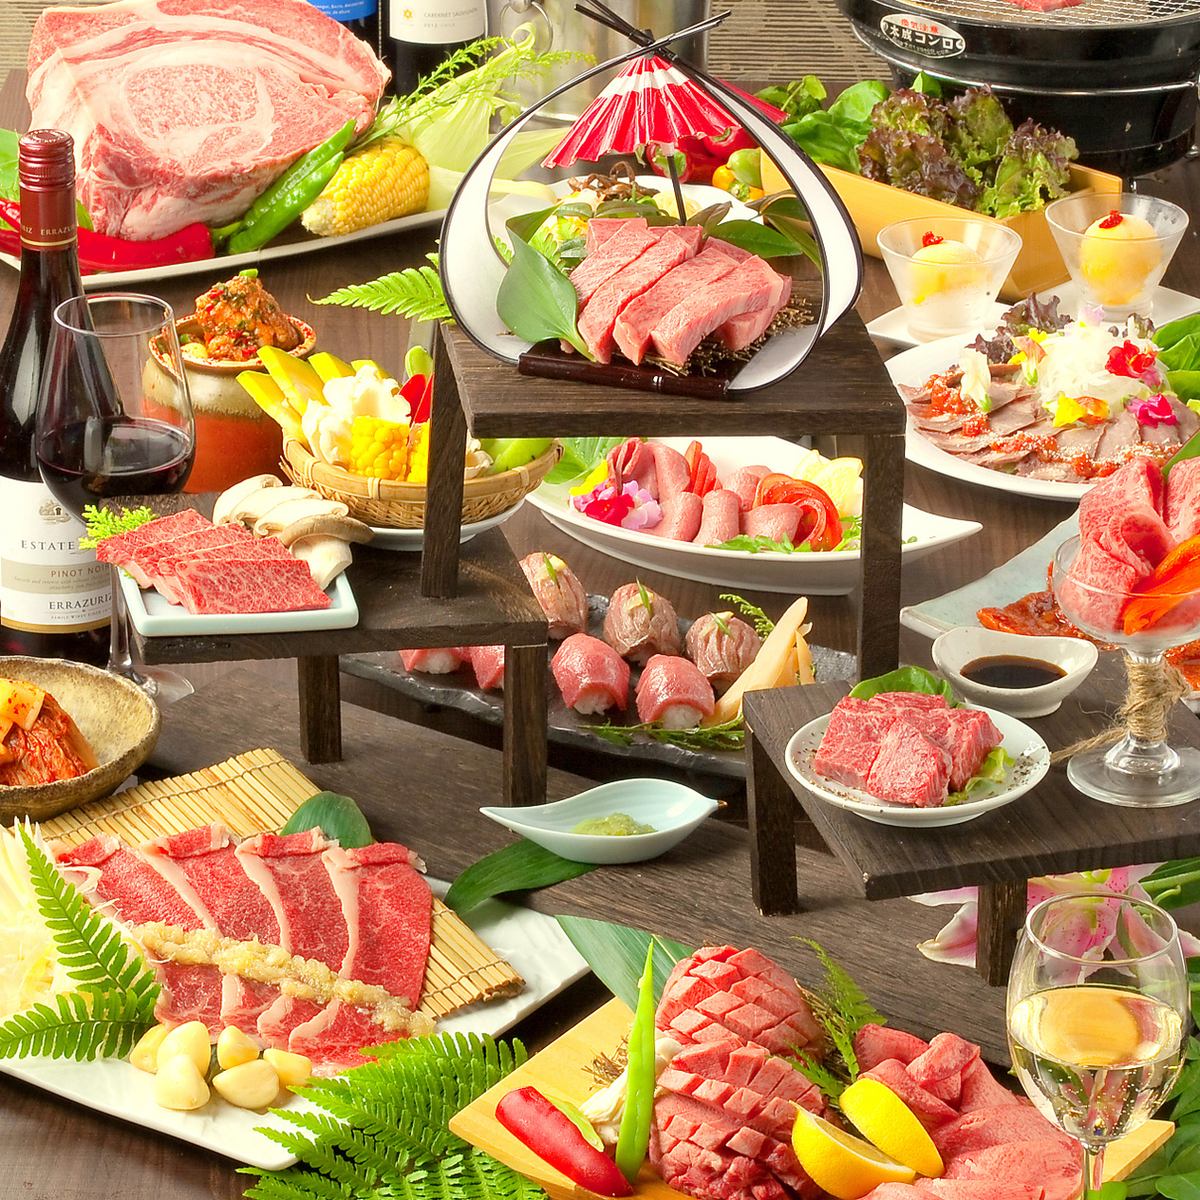 Specially selected Kuroge Wagyu beef yakiniku from Kyushu is served in a relaxing private room. There are also many meat sushi and exquisite dishes.